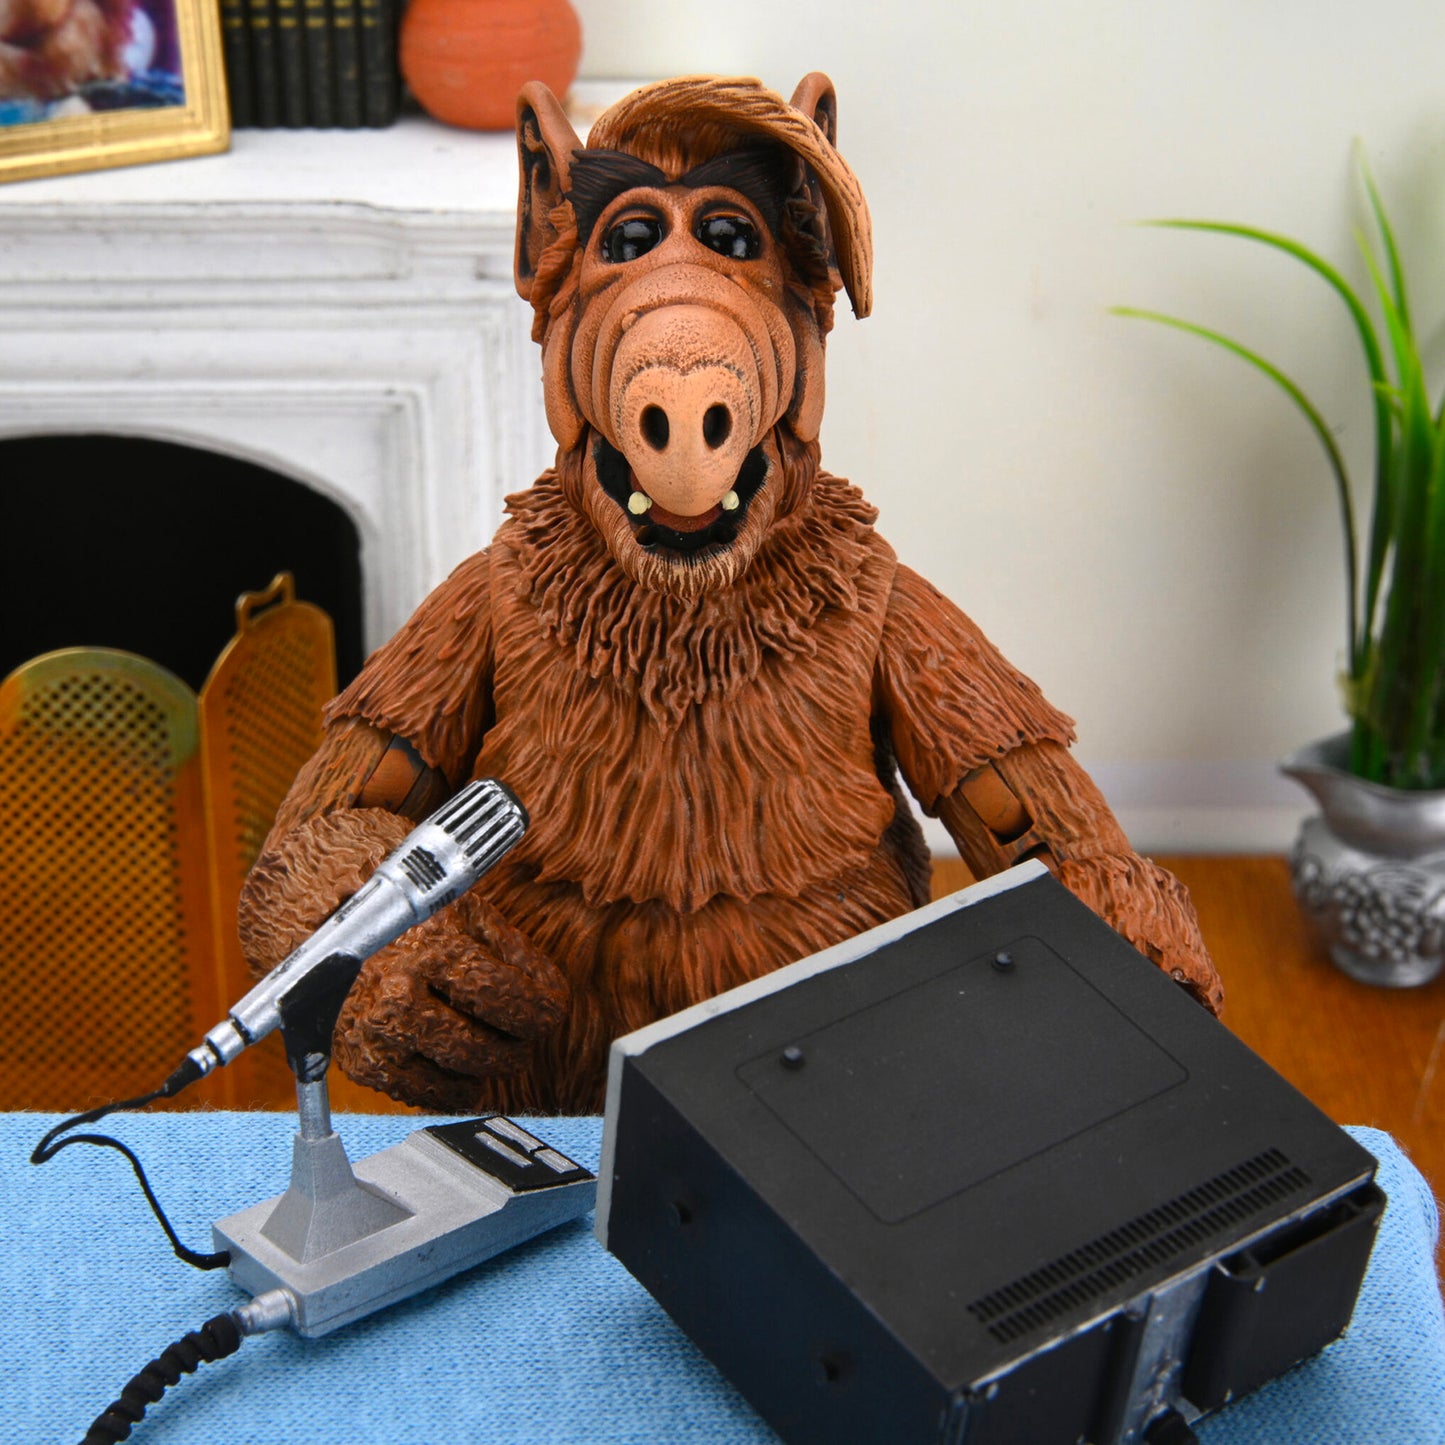 NECA: Ultimate Alf 7" Tall Action Figure